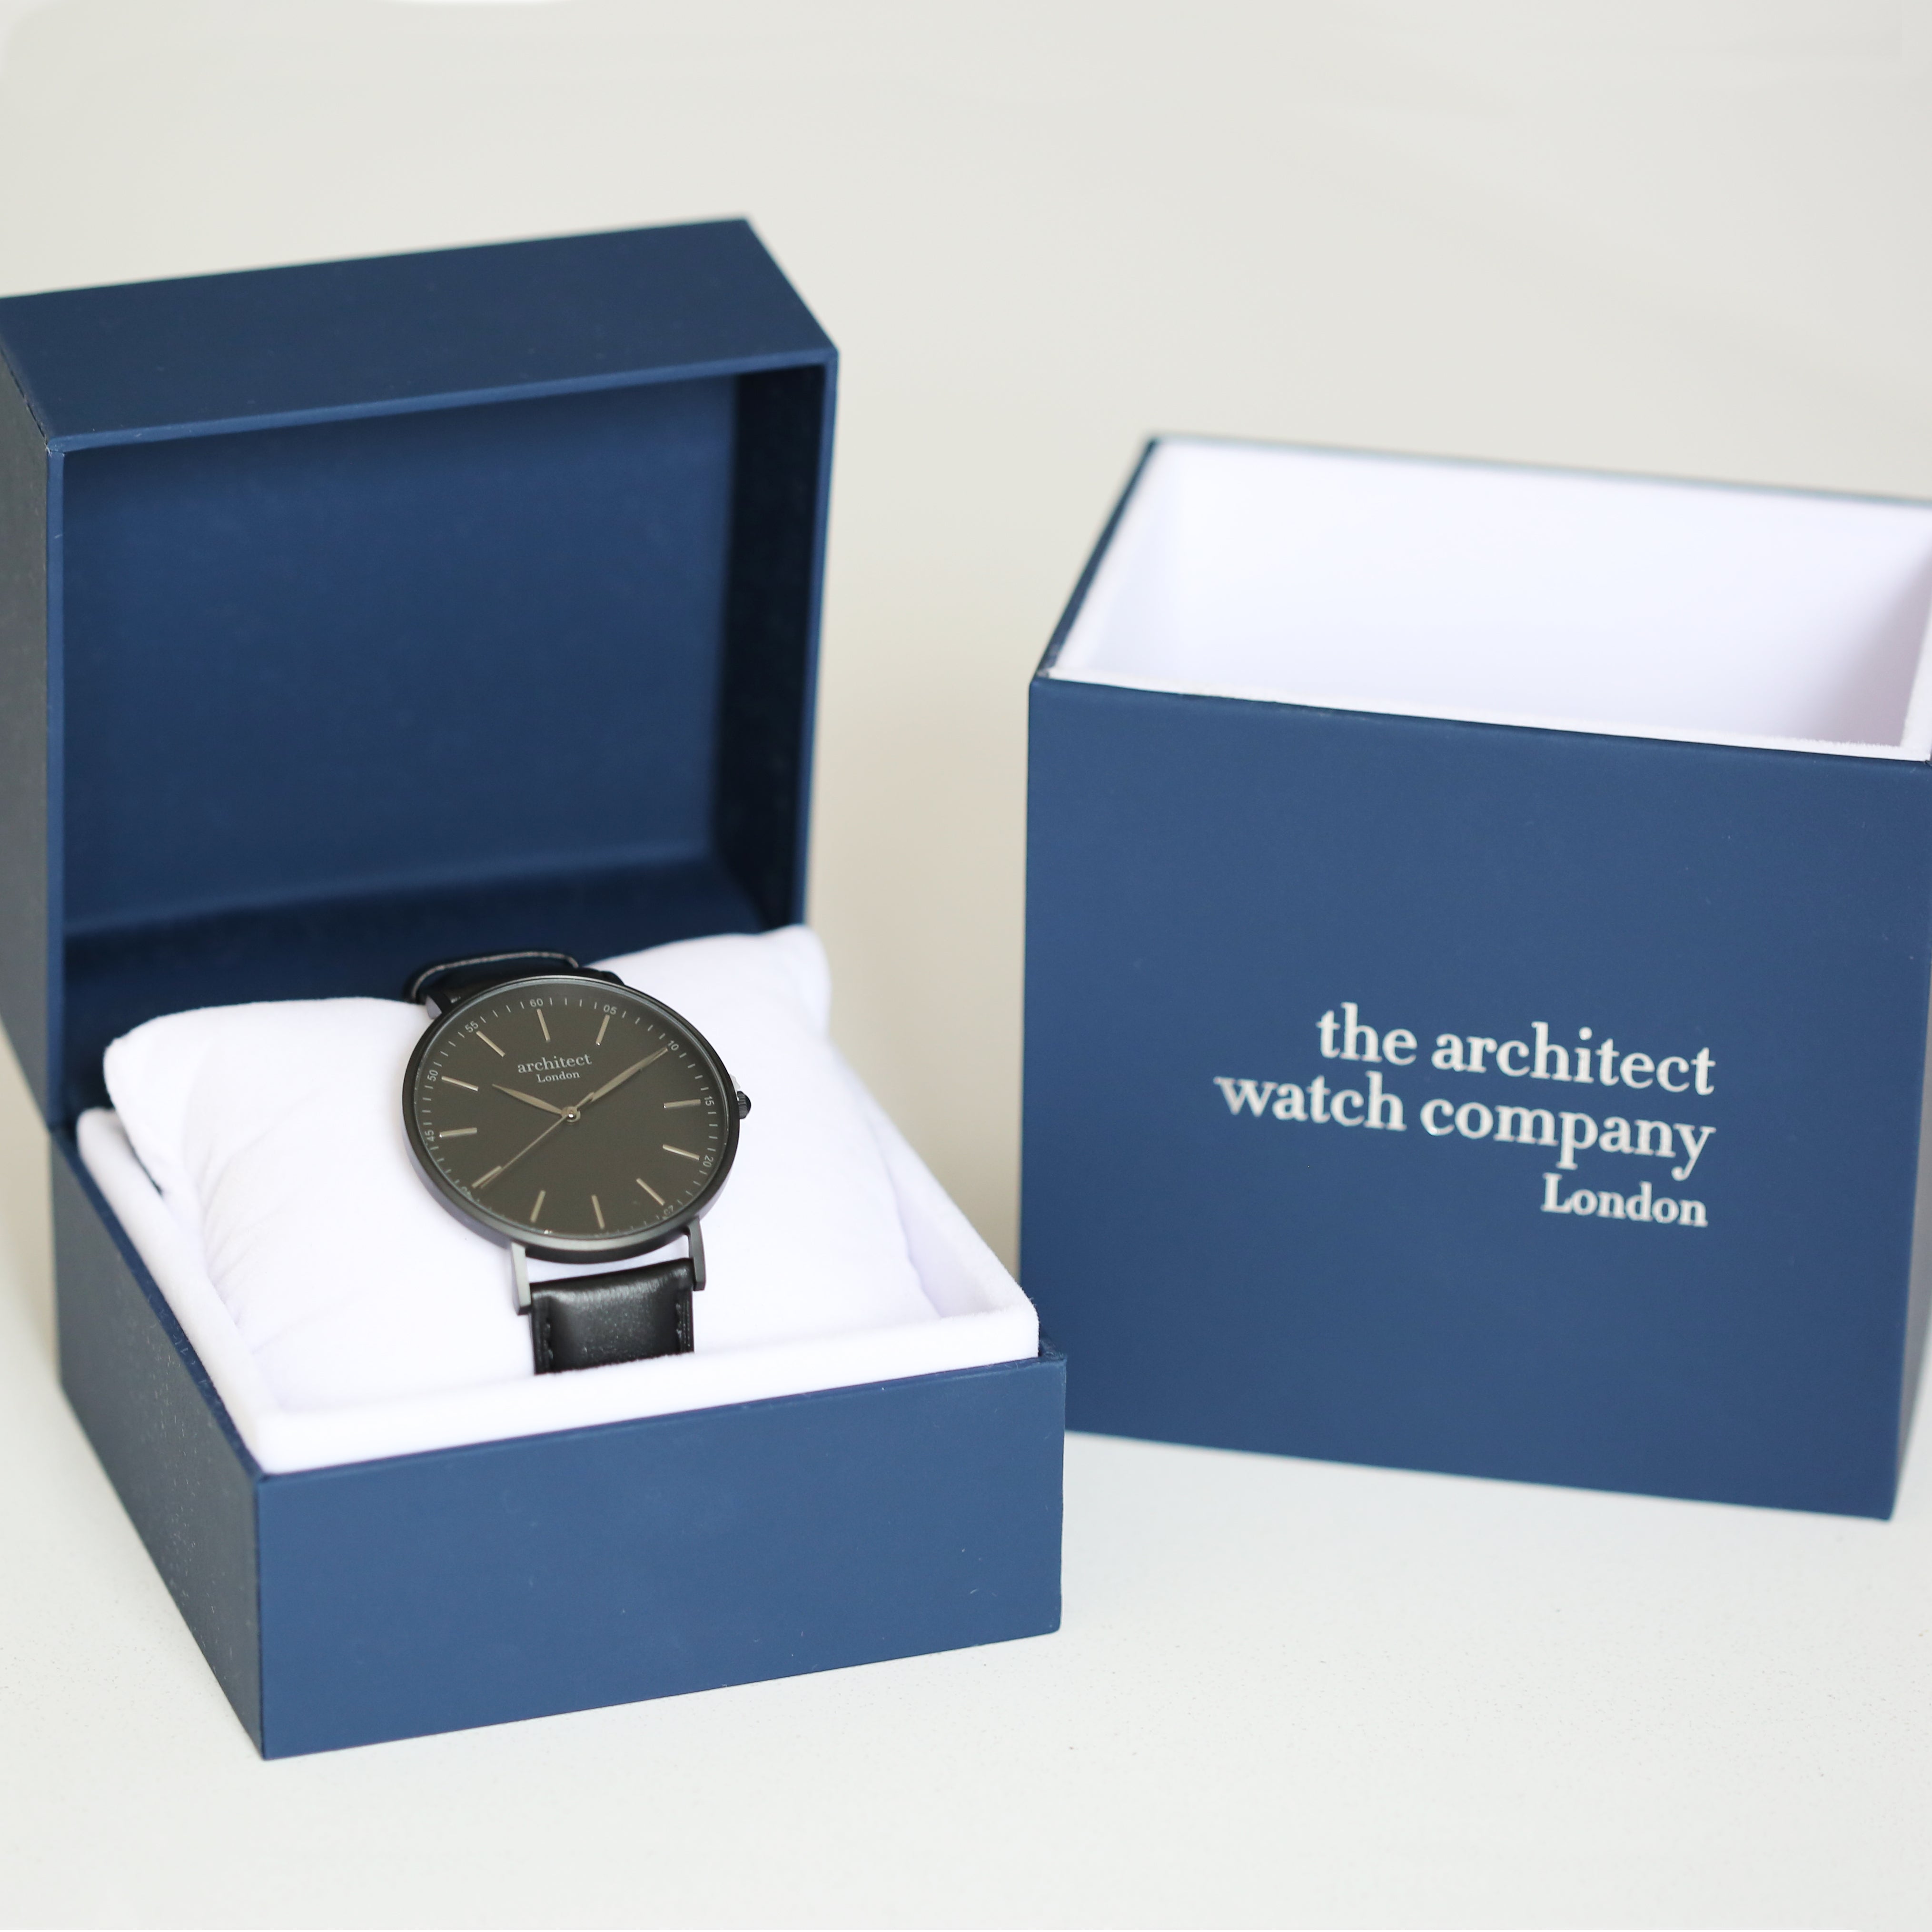 Contactless Payment Watch - Men's Architect Minimalist + Jet Black Strap + Own Handwriting Engraving